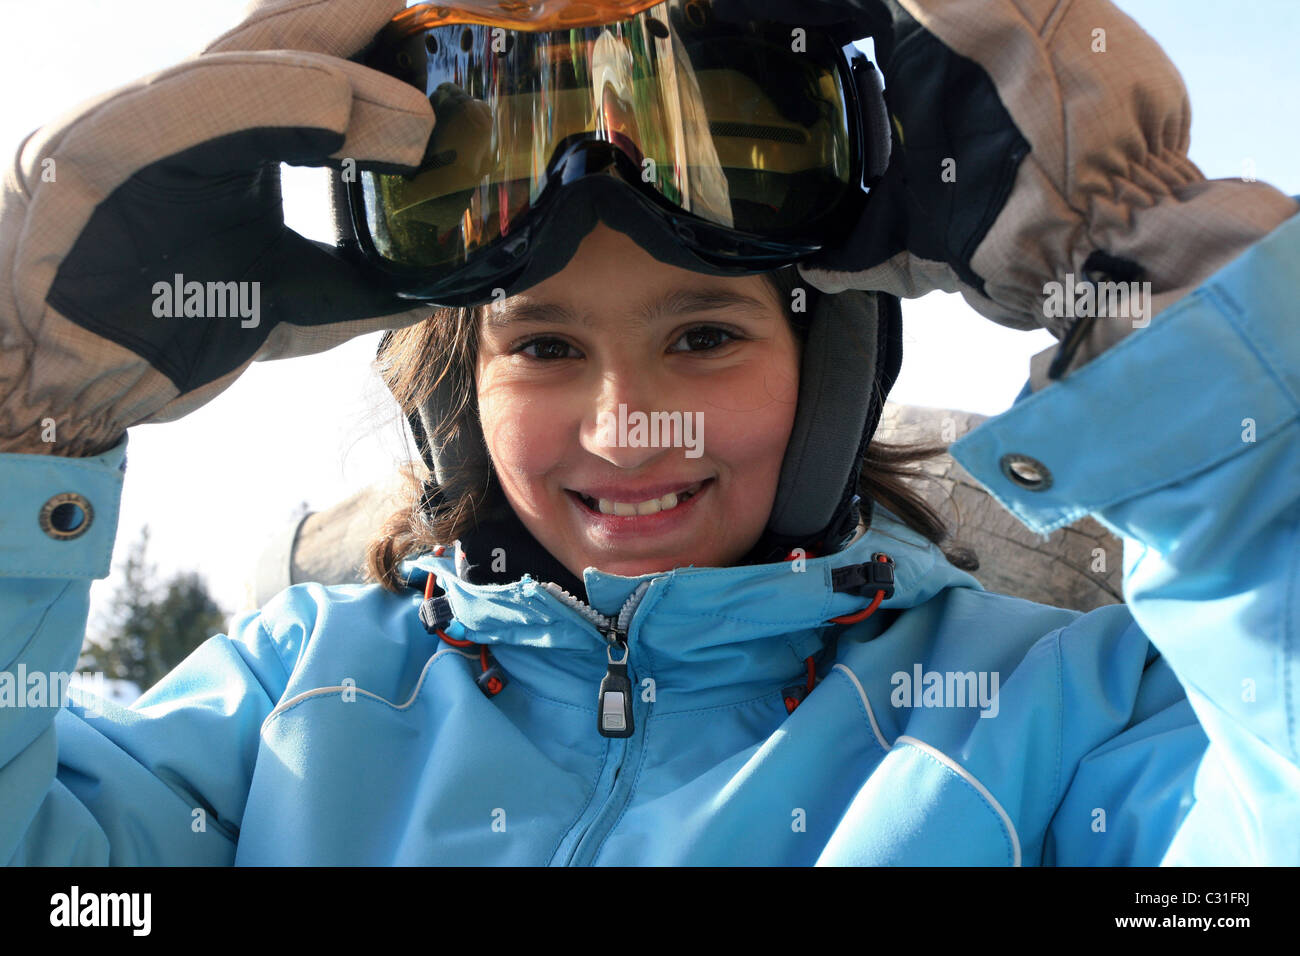 YOUNG GIRL WITH SKI MASK AND HAT Stock Photo